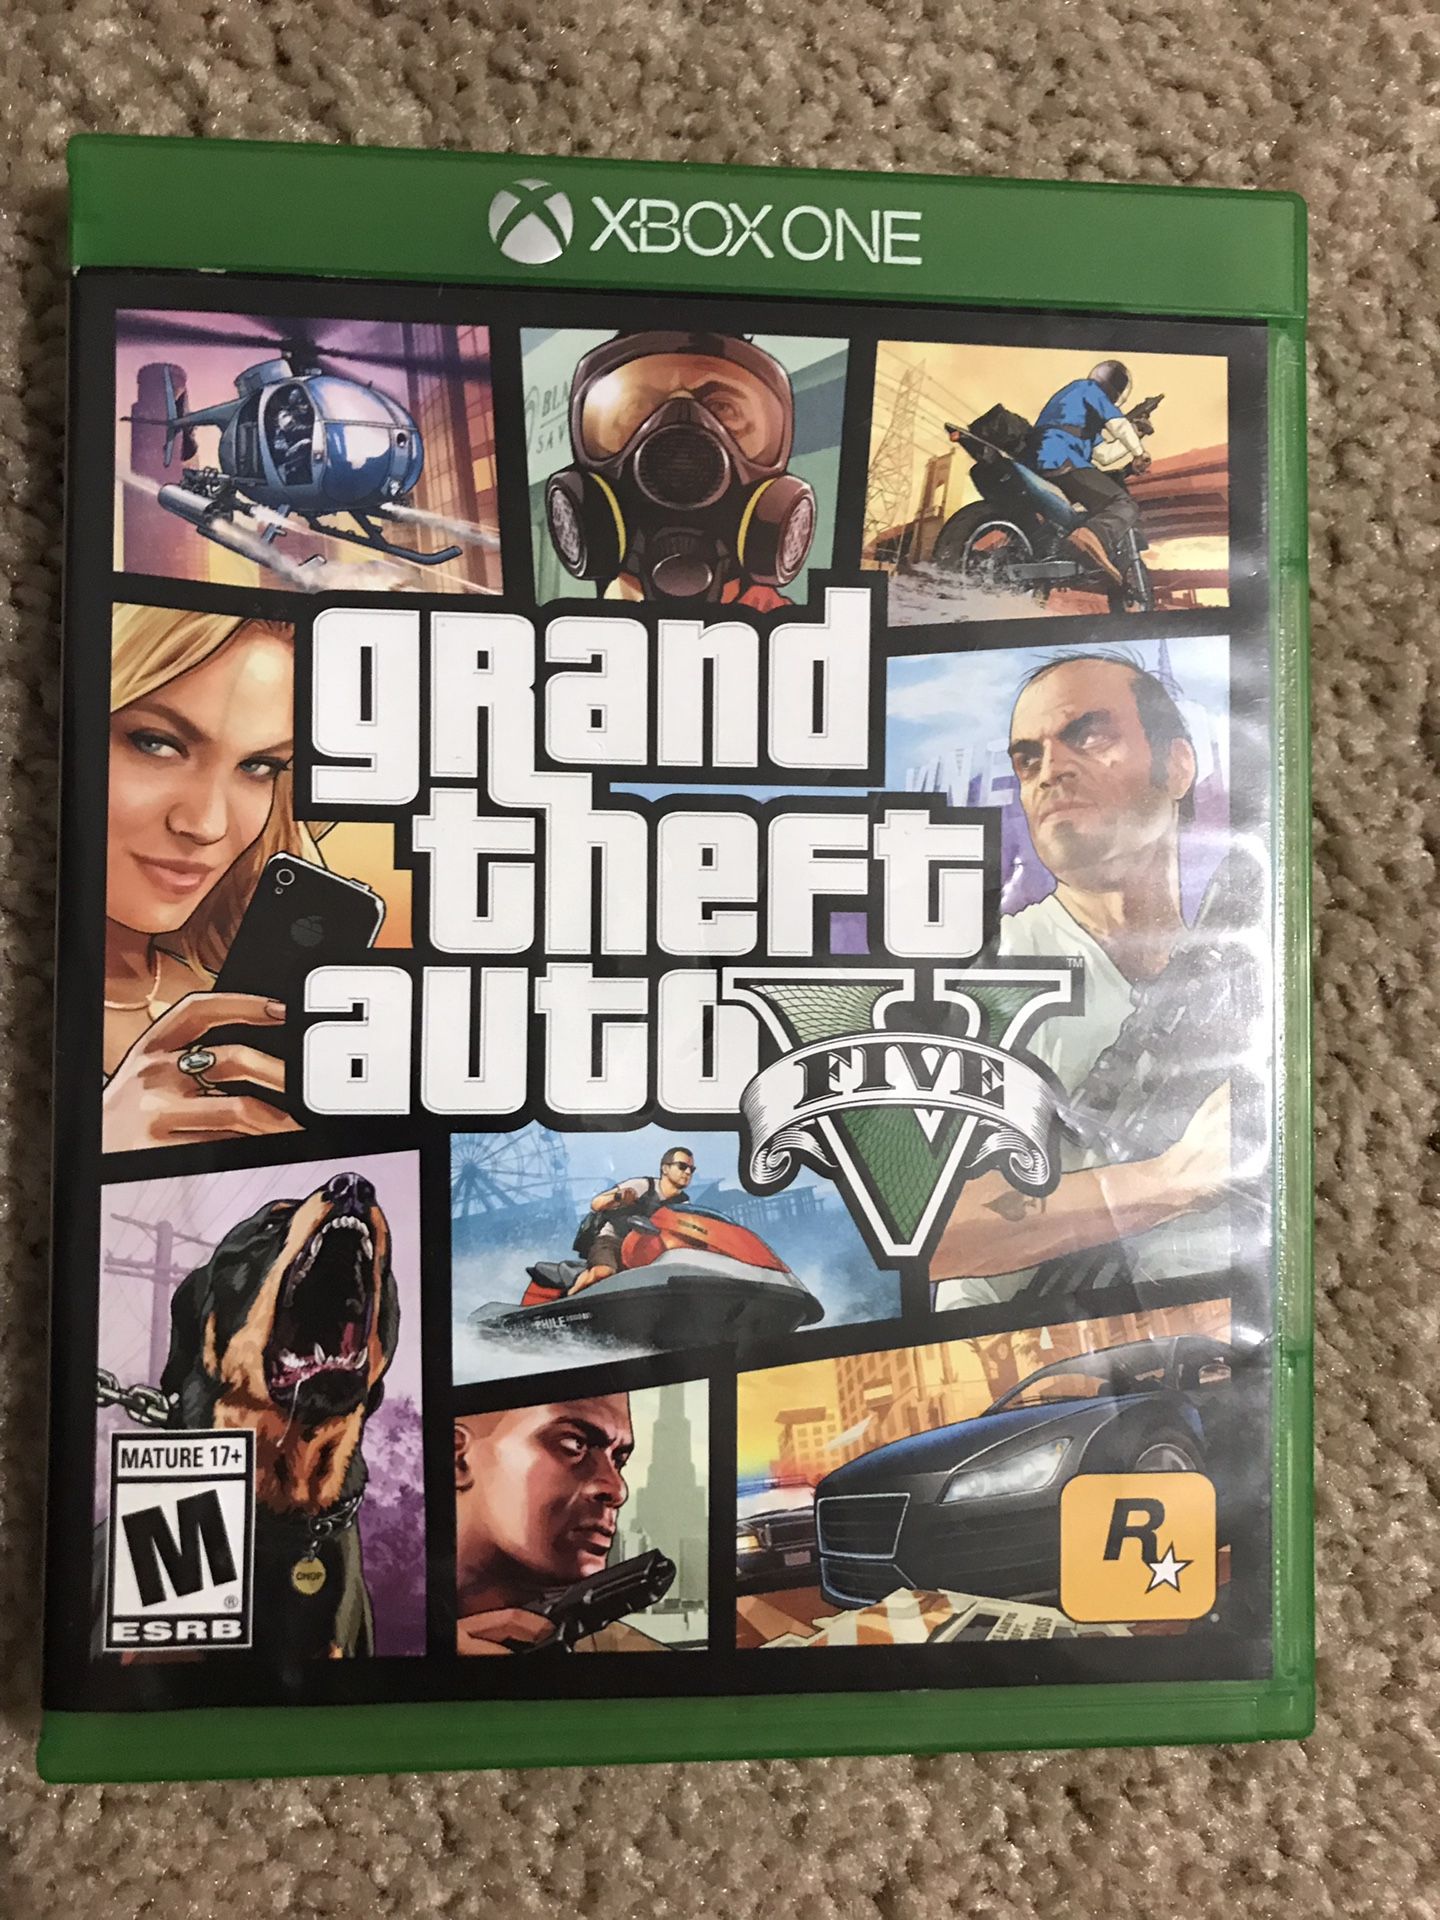 GTA 5, Battlefield 1, Fallout 4 - 1 price for all!